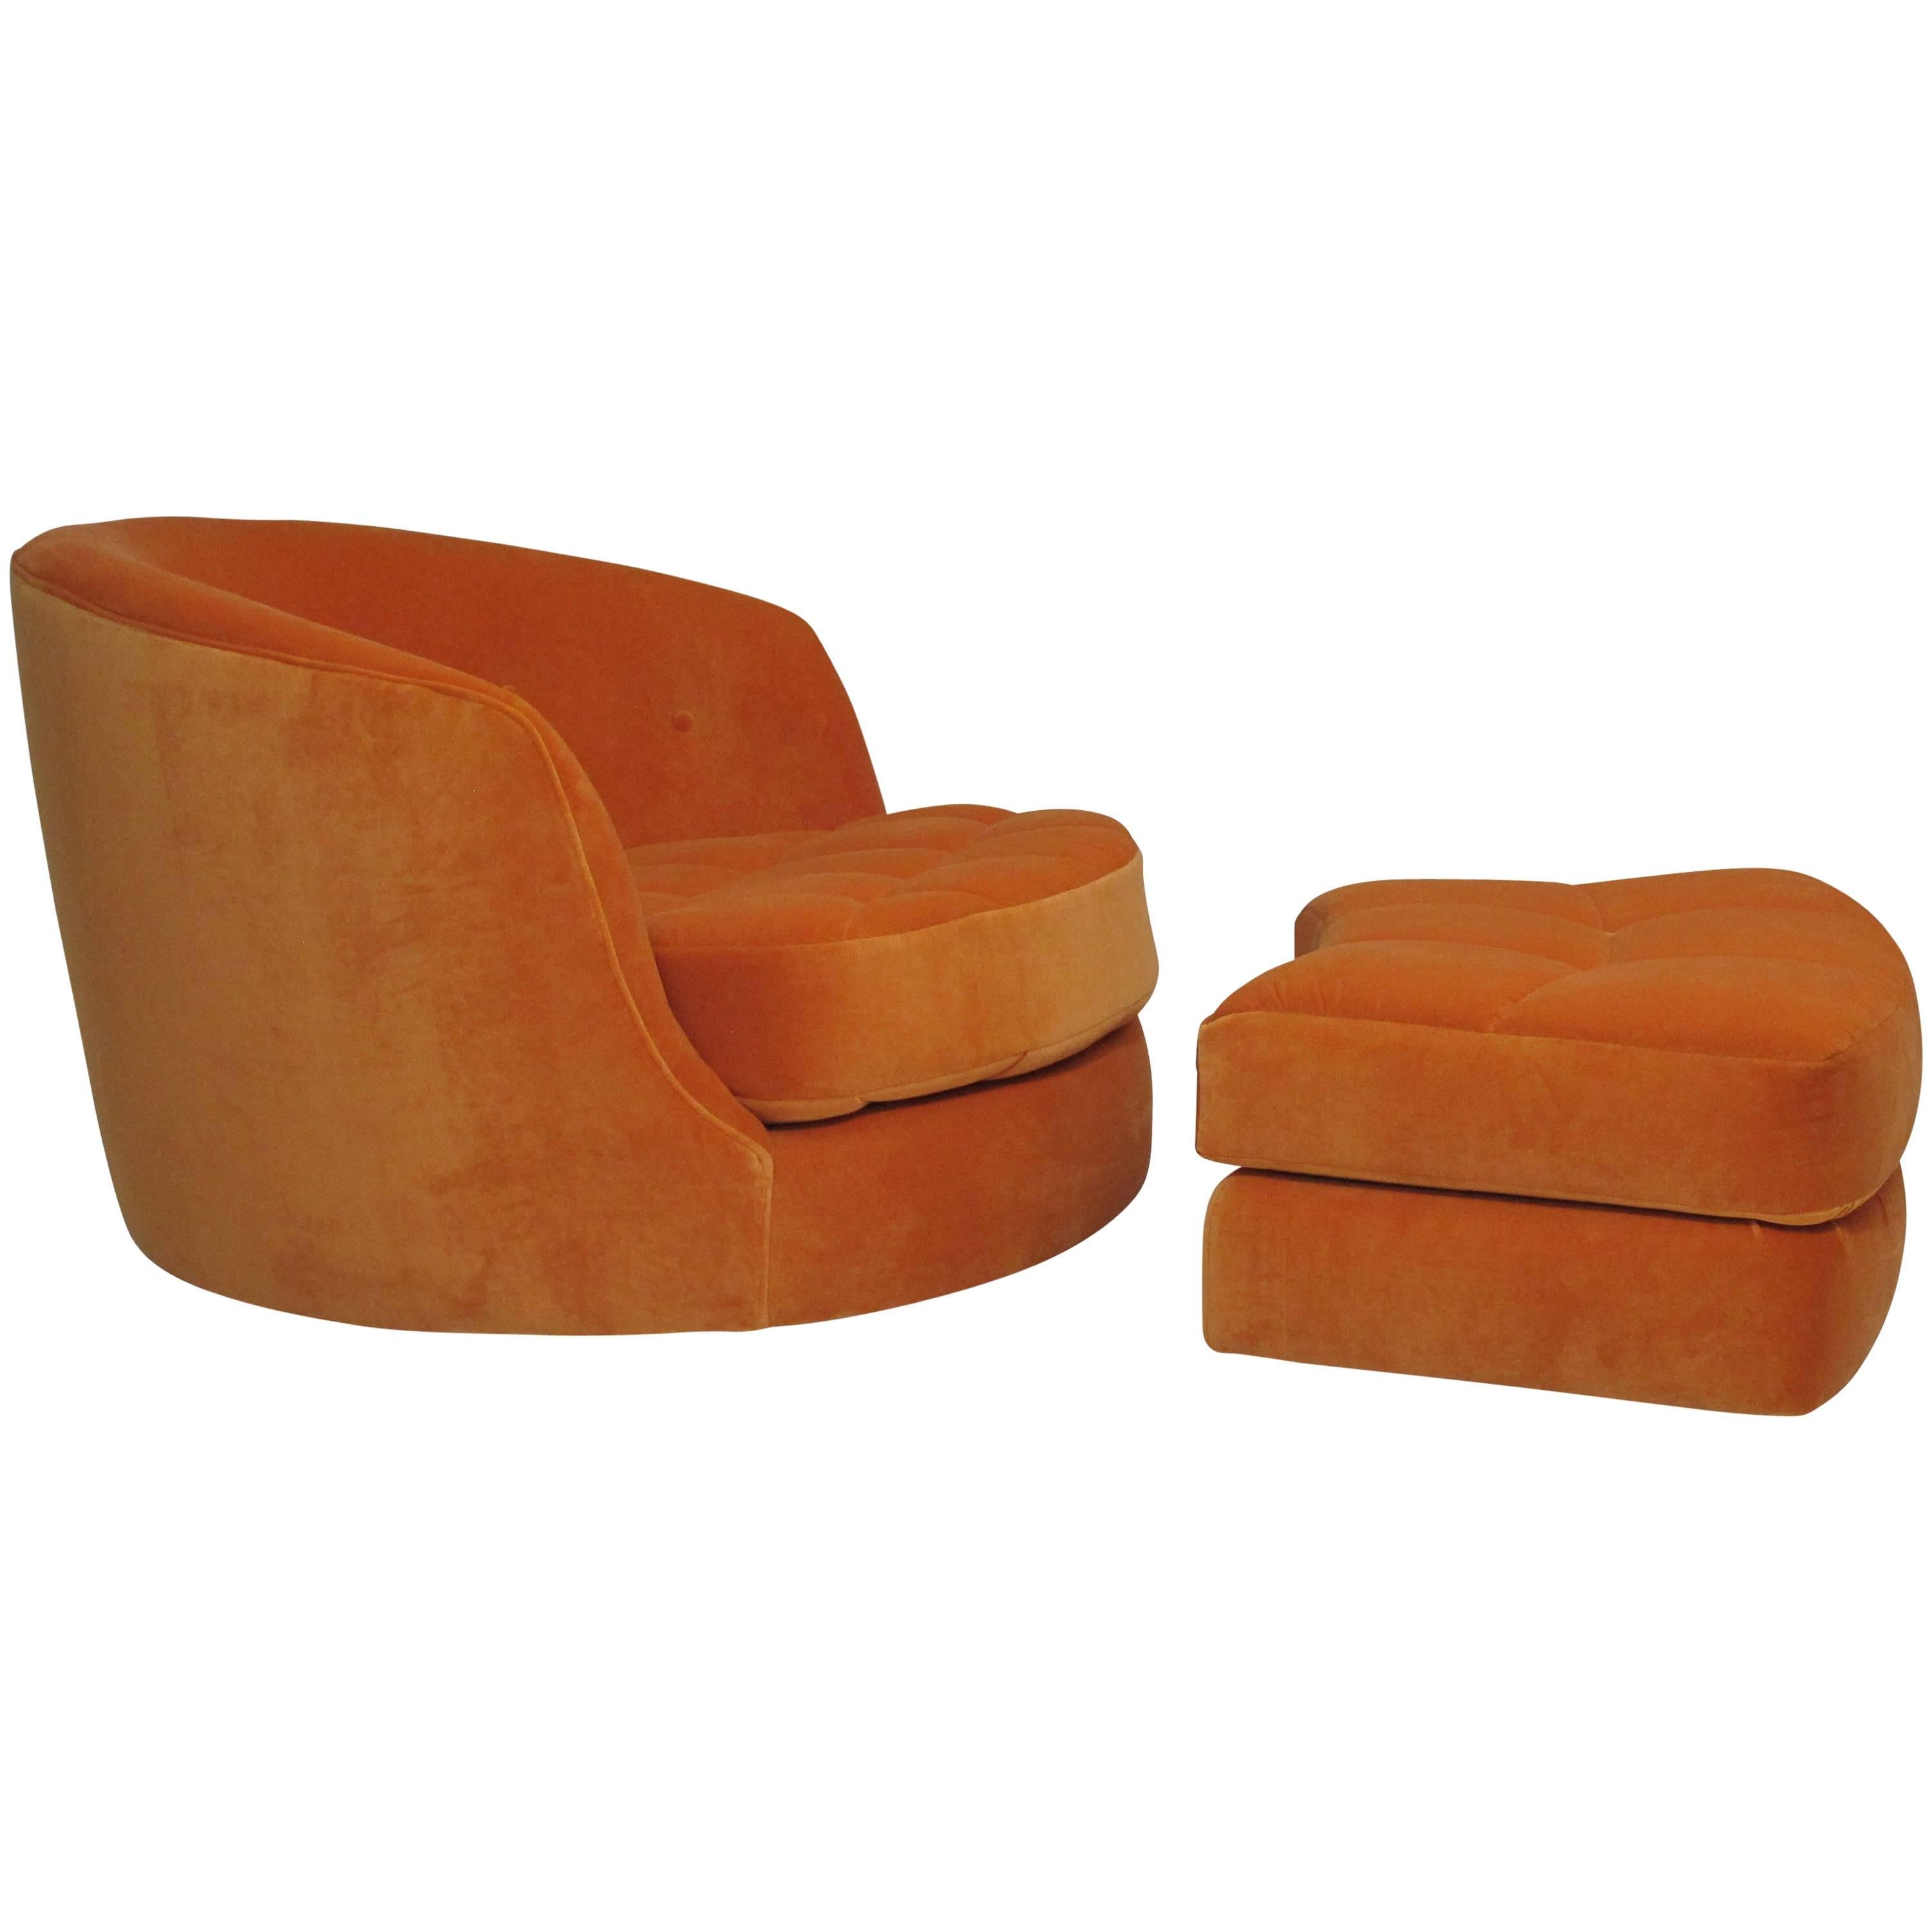 Swivel Tub lounge chair and ottoman designed by Milo Baughman for Thayer Coggin in 1965 available in COM. 
Includes one, 24